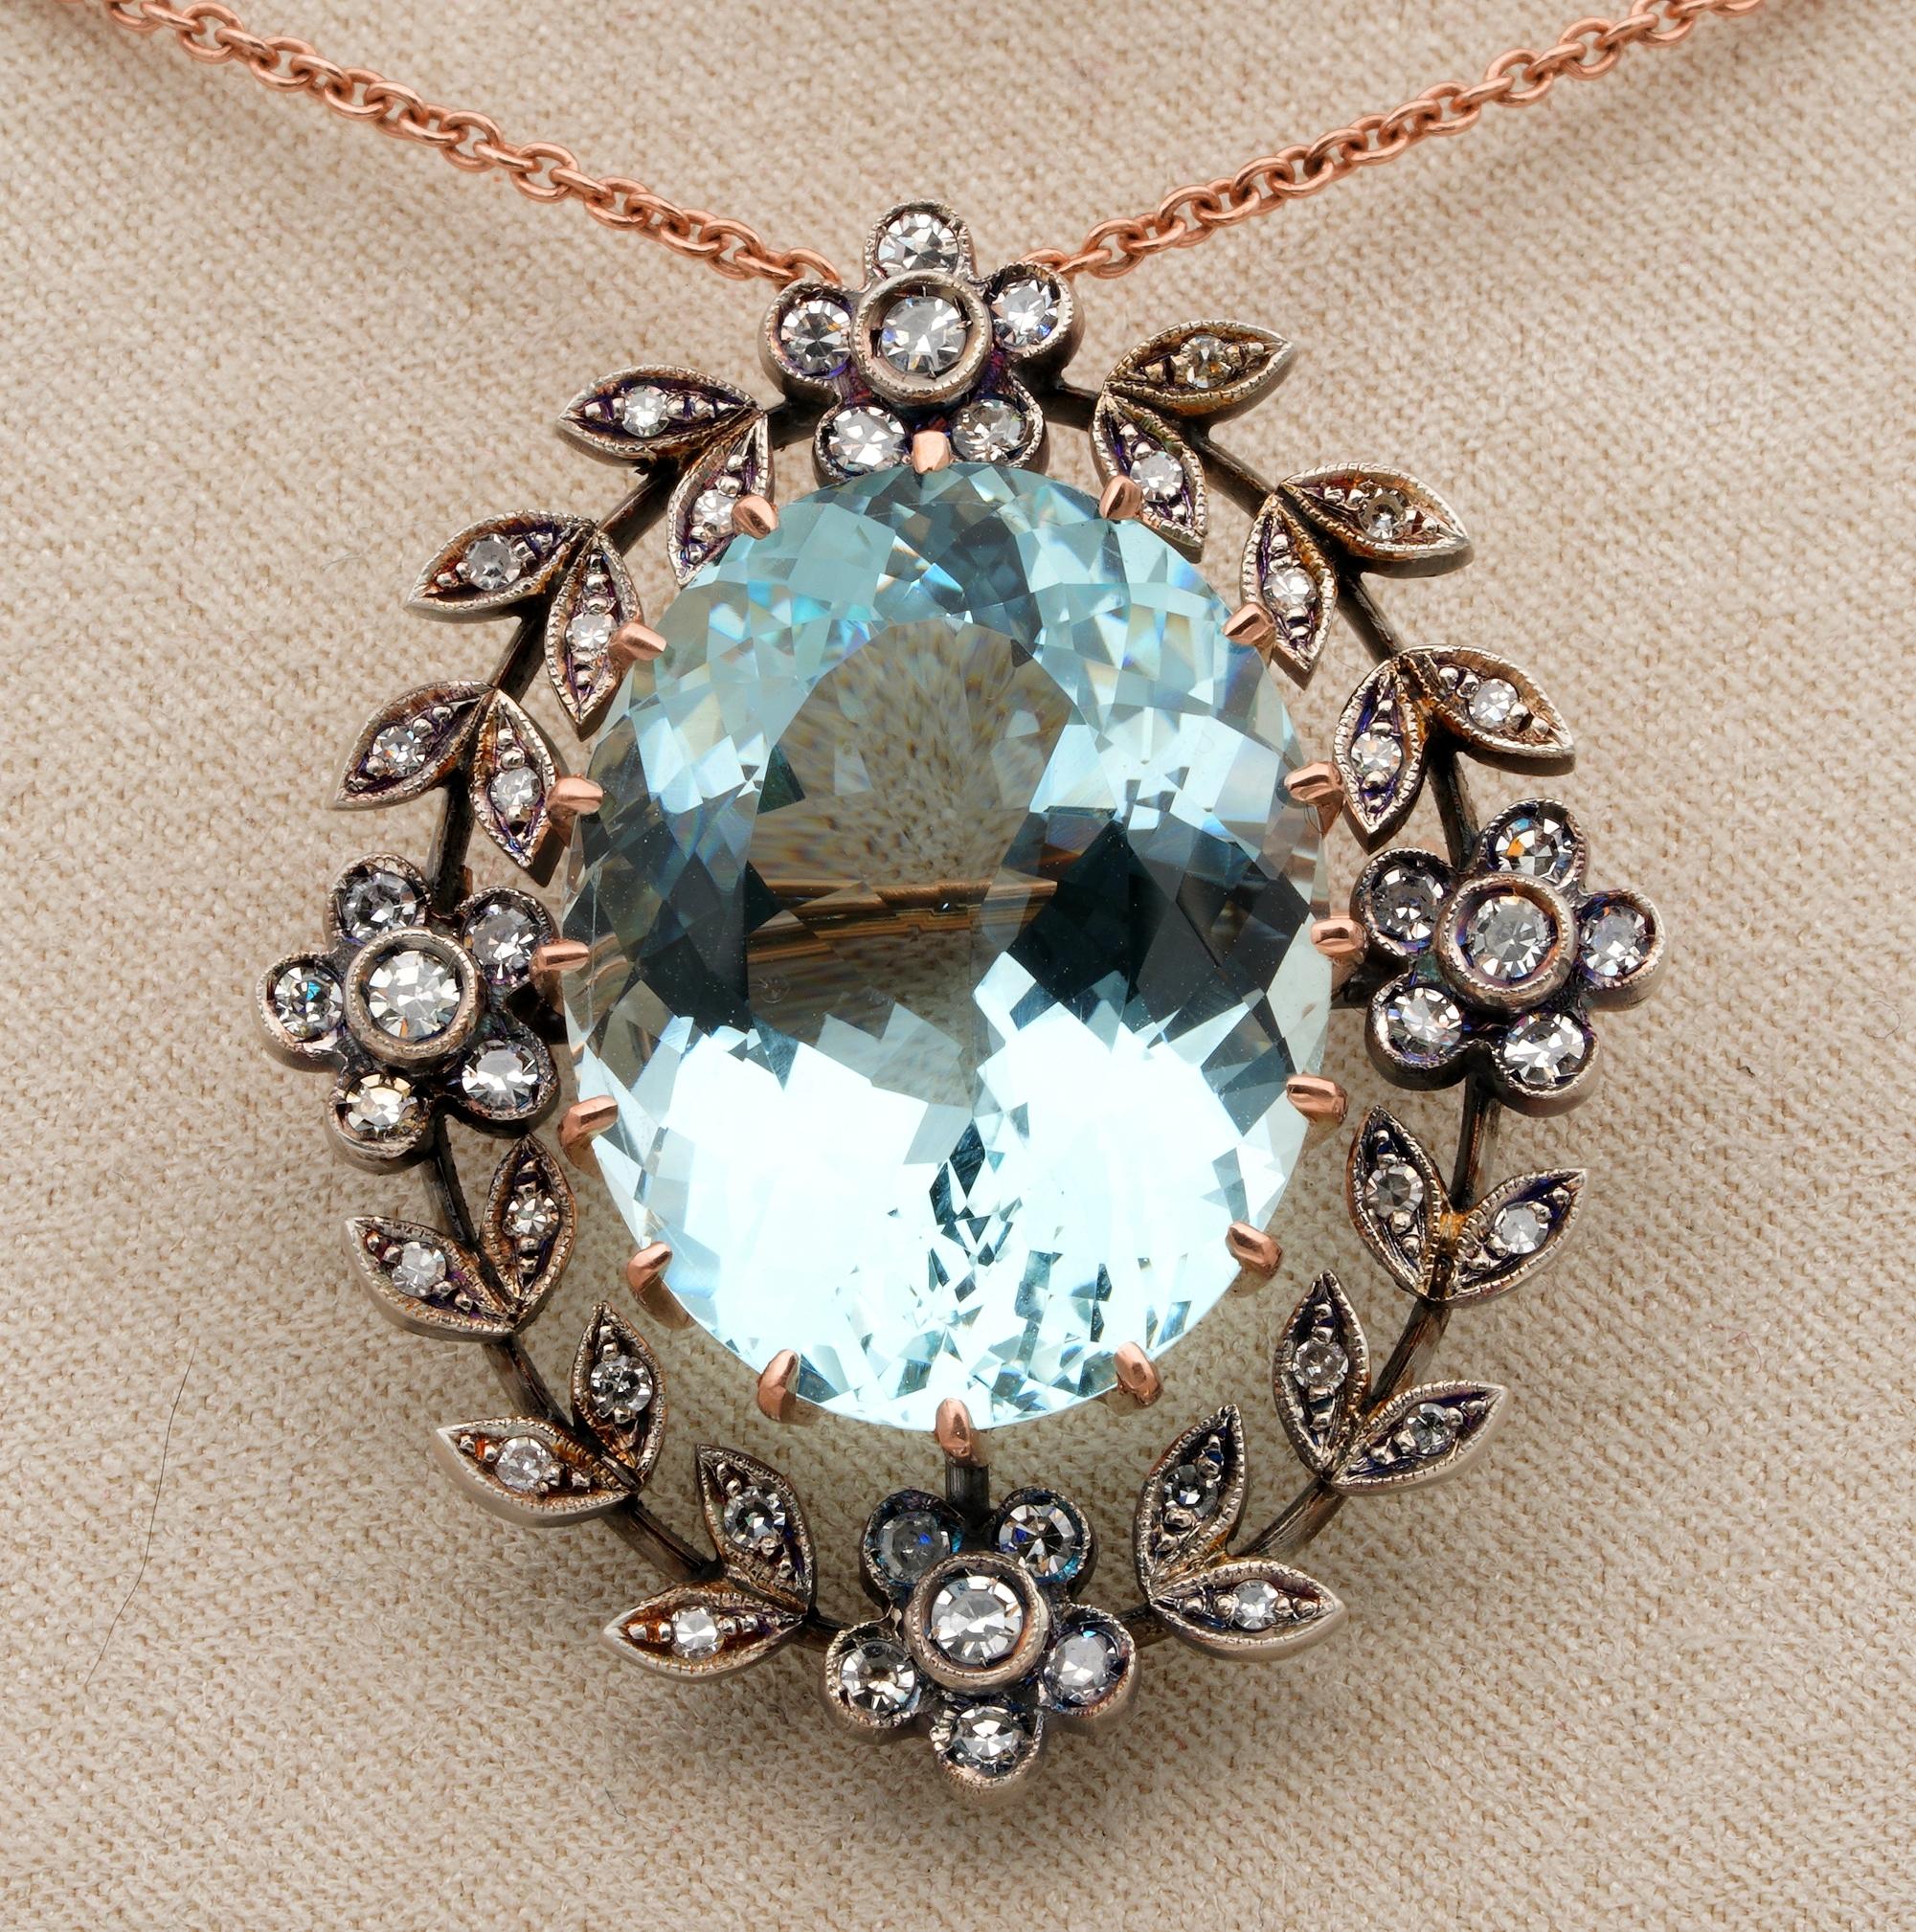 Heirloom
An impressive Edwardian era , classy flowery design , large sized brooch pendant, 1910 ca
Hand crafted of solid 18 KT and solid silver, tested
Impressive oval large size taking the shape from the large Natural Aquamarine set in the middle,